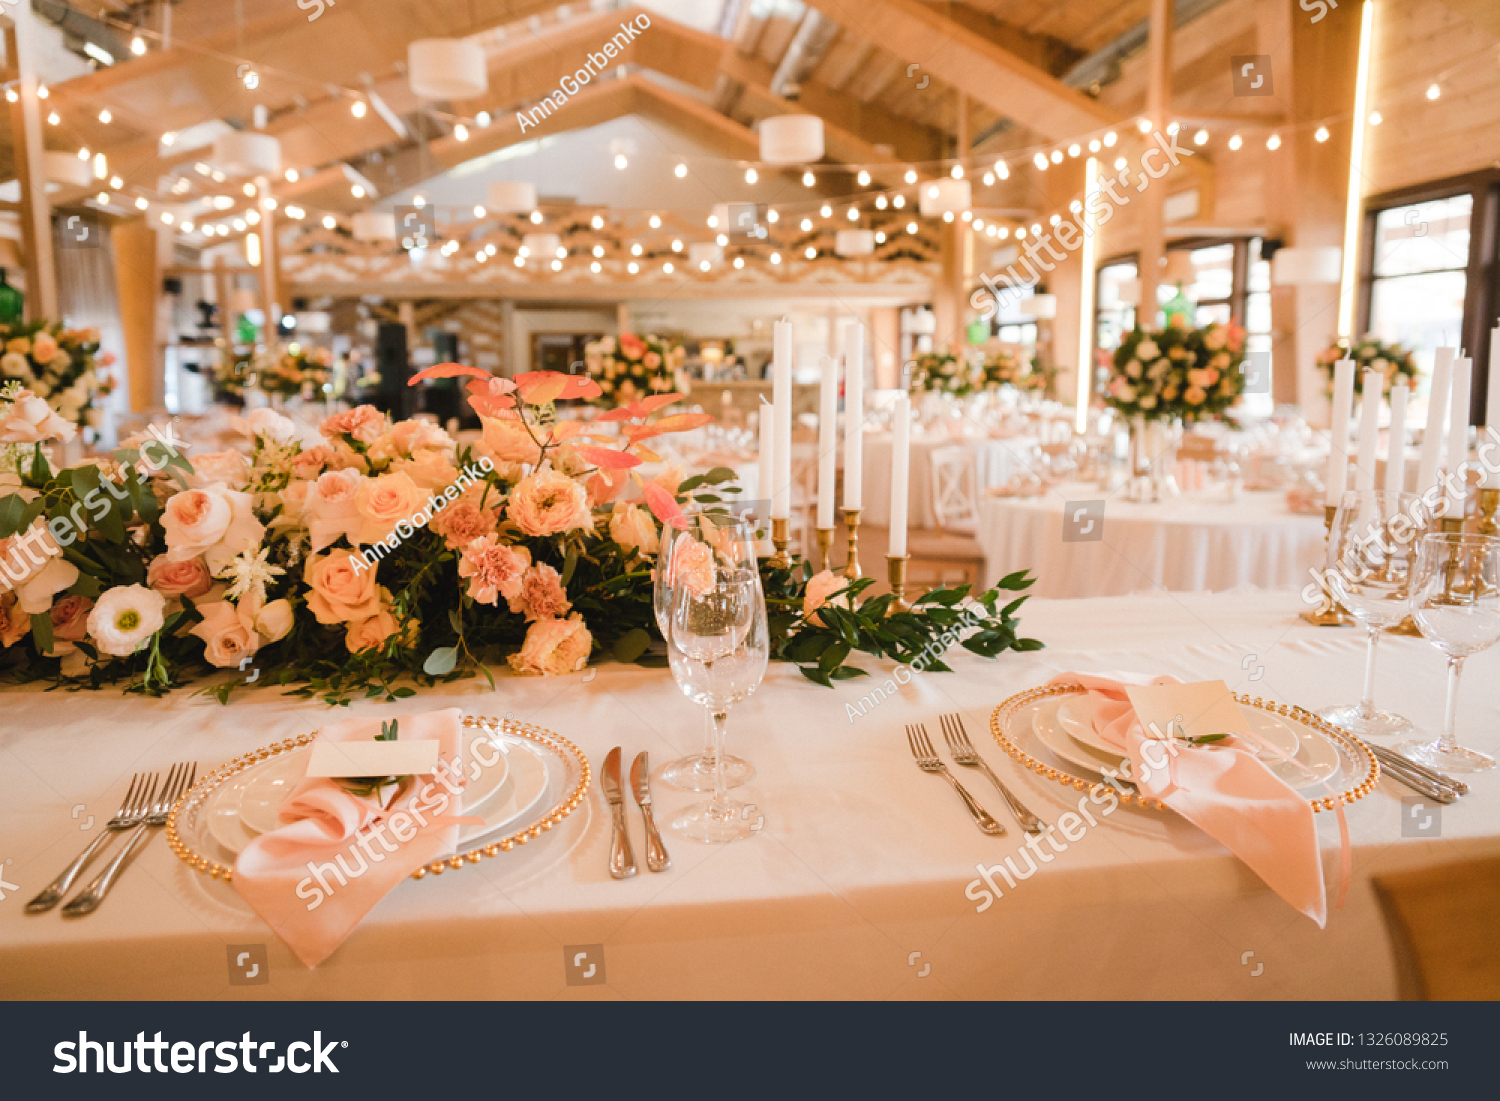 Coziness and style. Modern event design. Table setting at wedding reception. Floral compositions with beautiful flowers and greenery, candles, laying and plates on decorated table. #1326089825